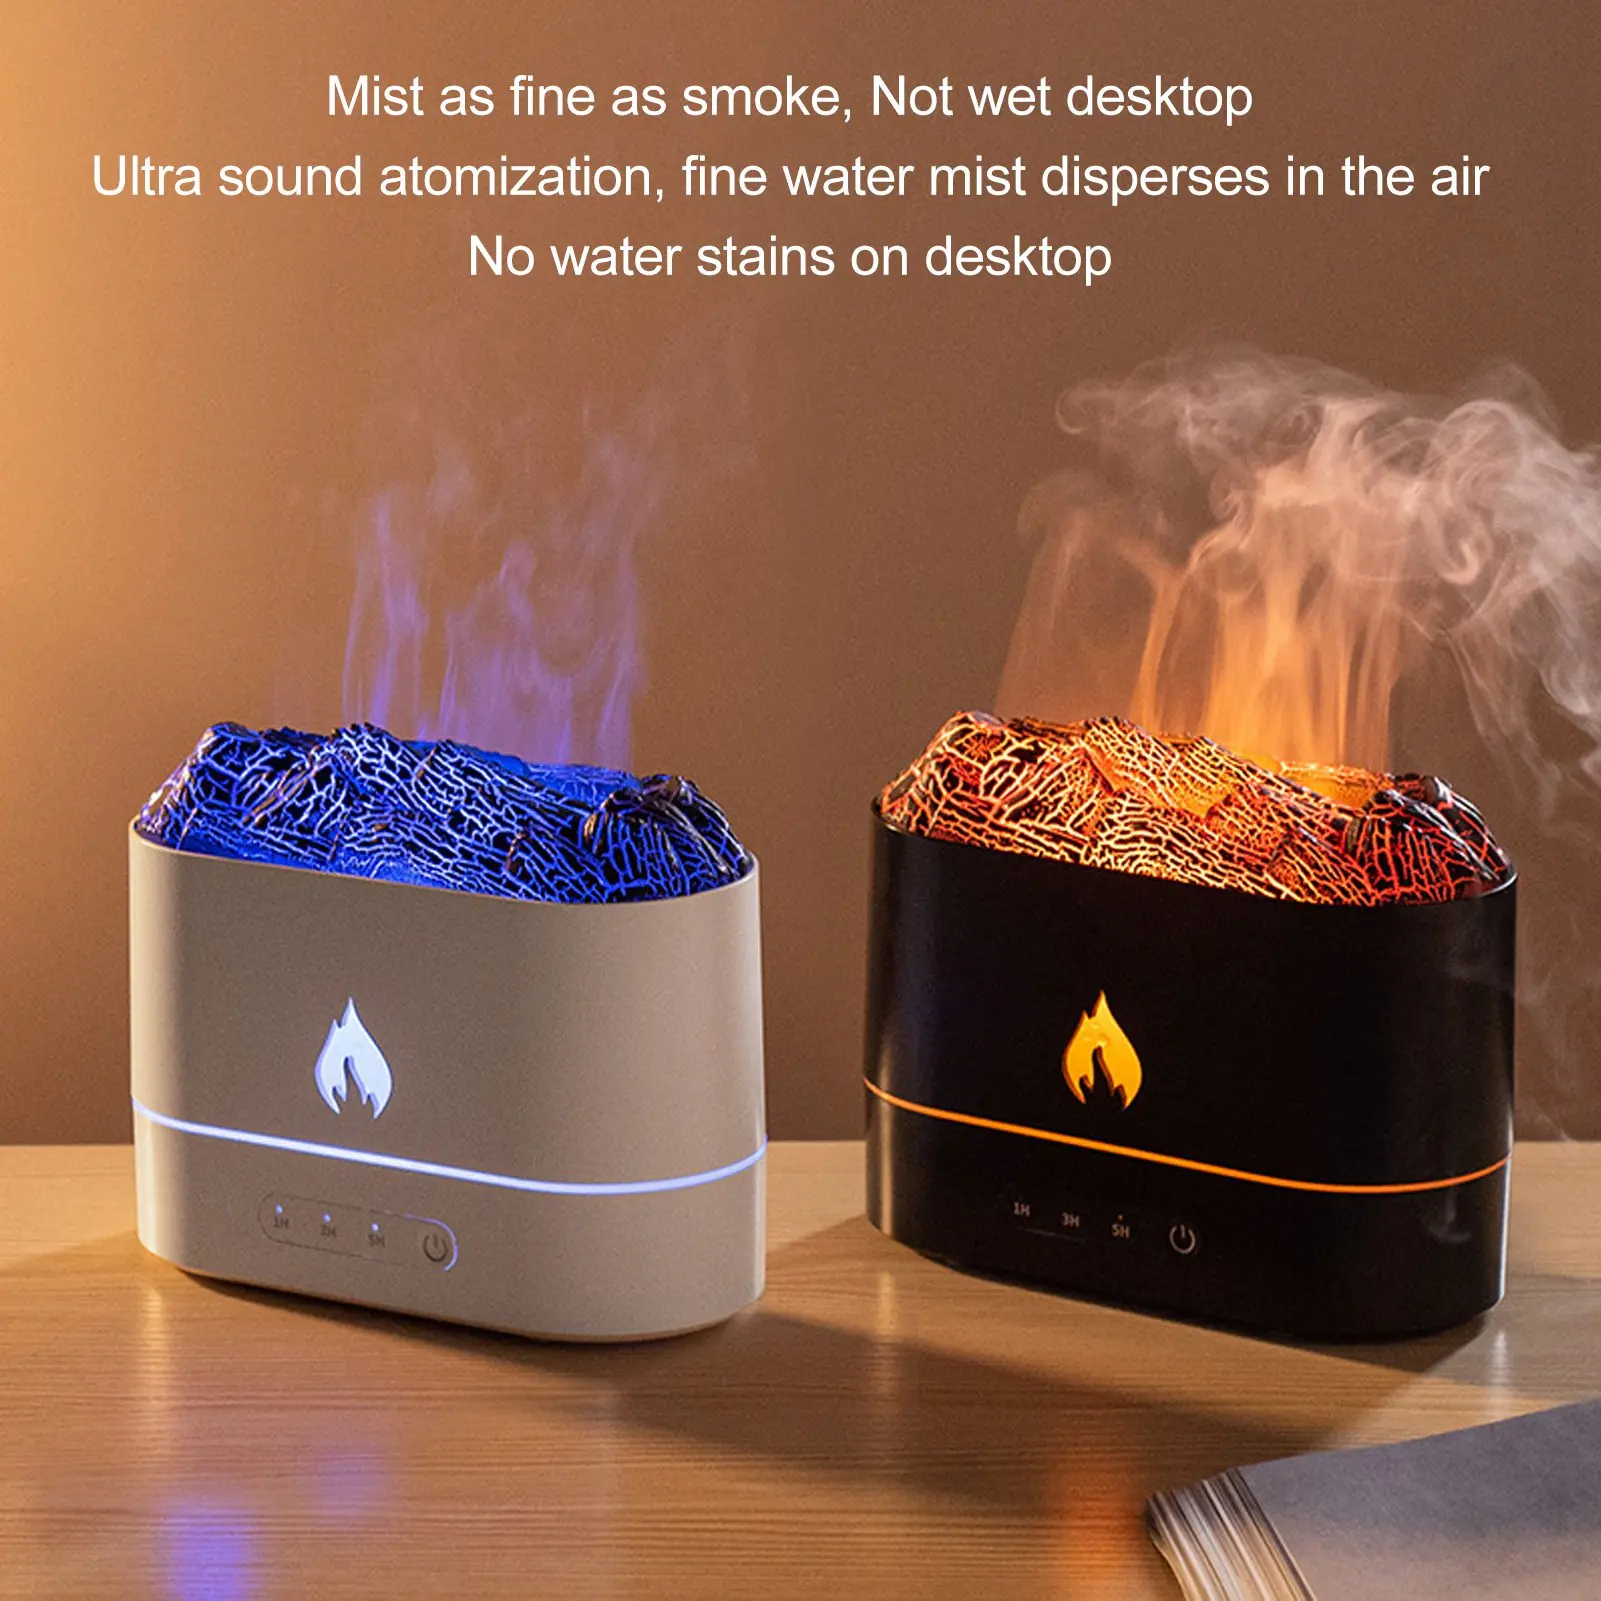 

Volcano Aroma Diffuser Simulated Flame Super Quiet Volcano Aromatherapy Humidifier 7 Colors Lights Smart Timer for Bedroom